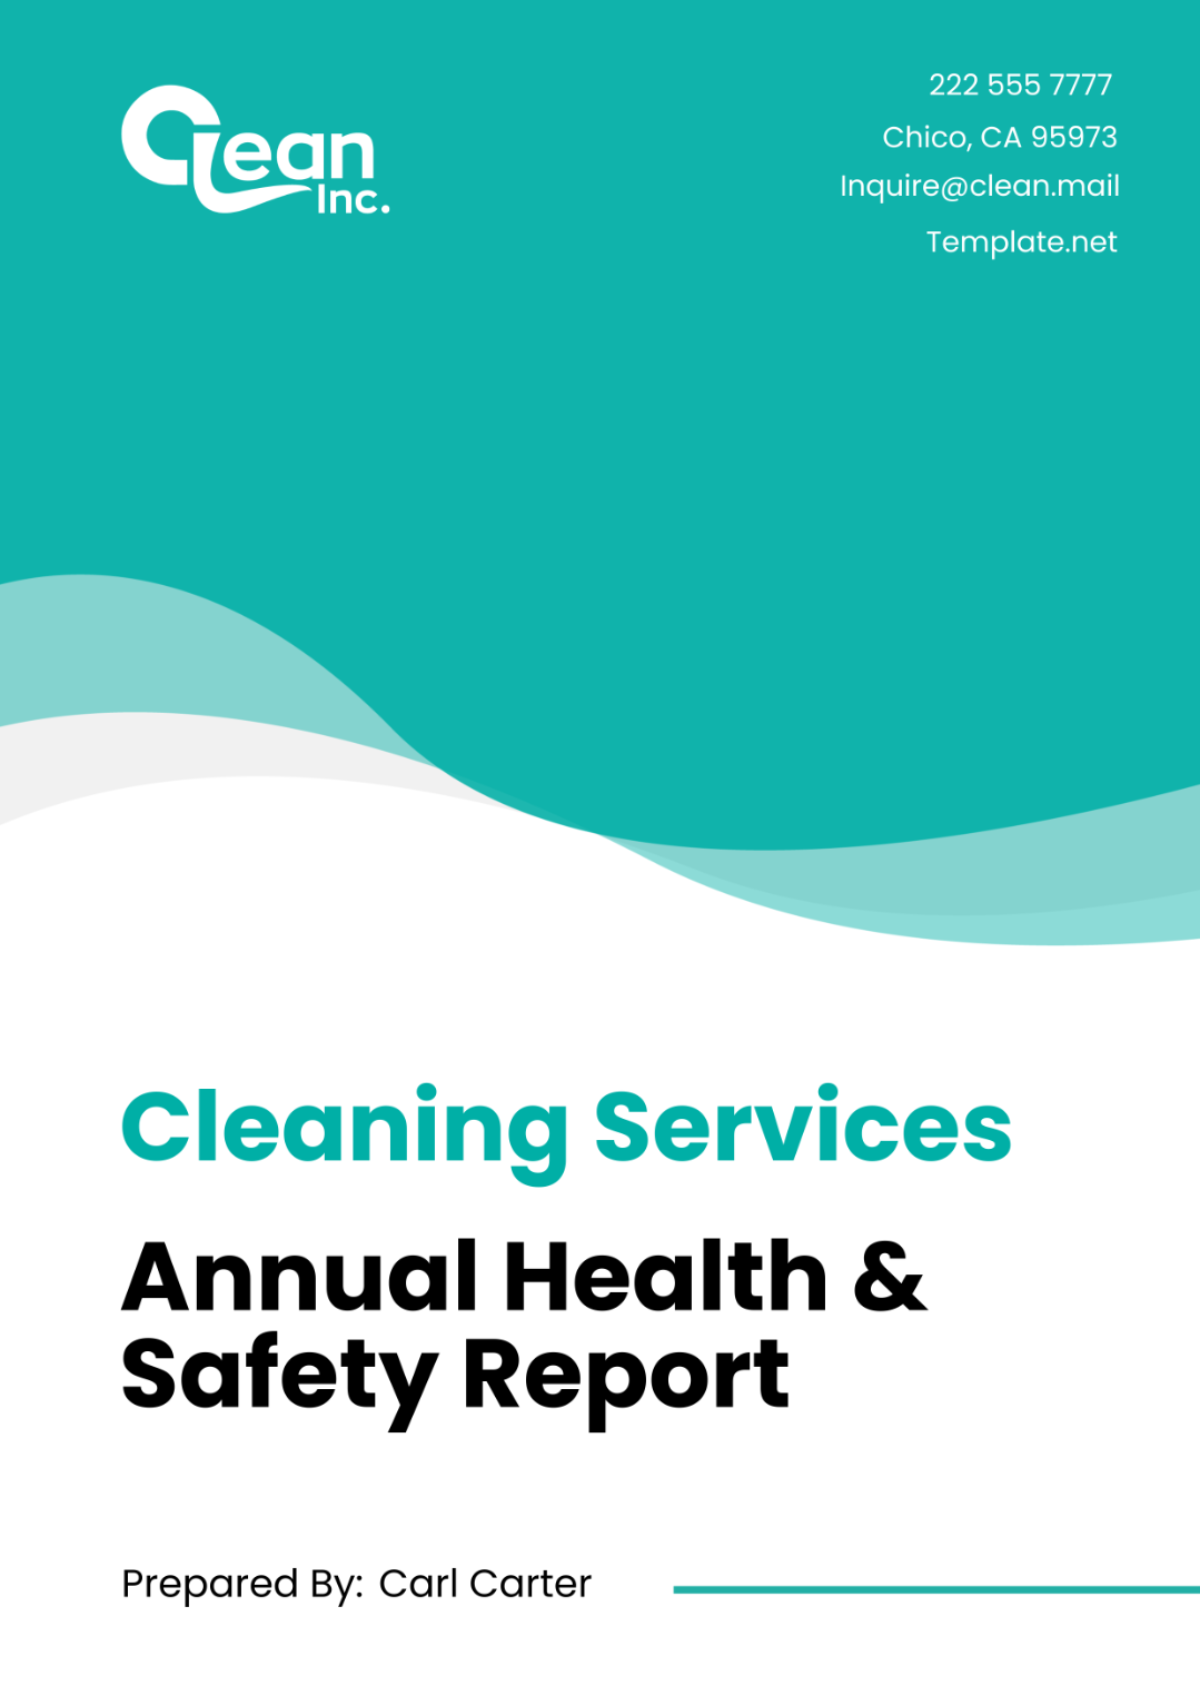 Cleaning Services Annual Health & Safety Report Template